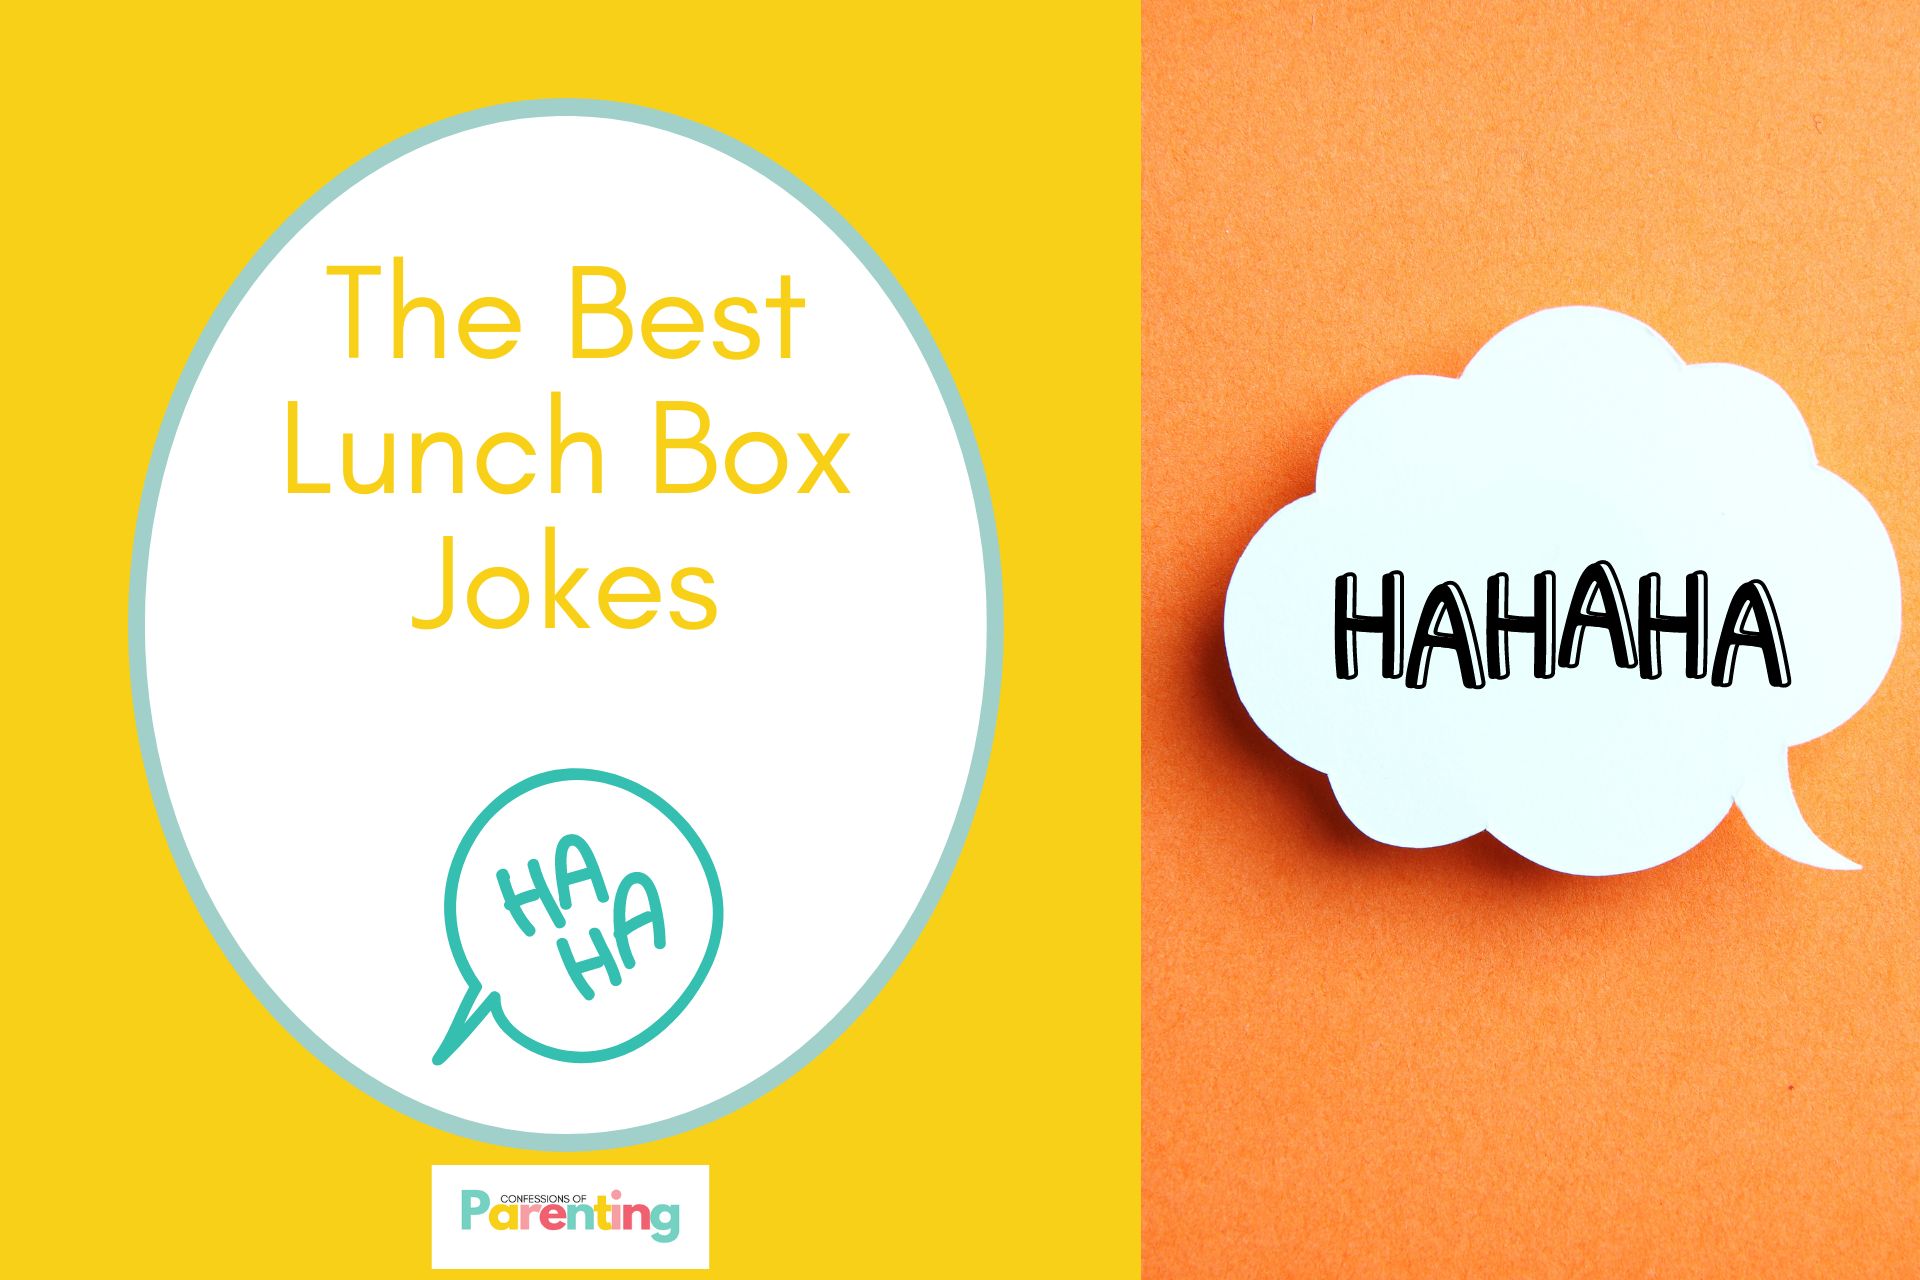 a "HAHAHA" speech bubble on half the image with a yellow background on the left with a white oval with light teal border with a image of a speech bubble and yellow writing "the best lunch box jokes"